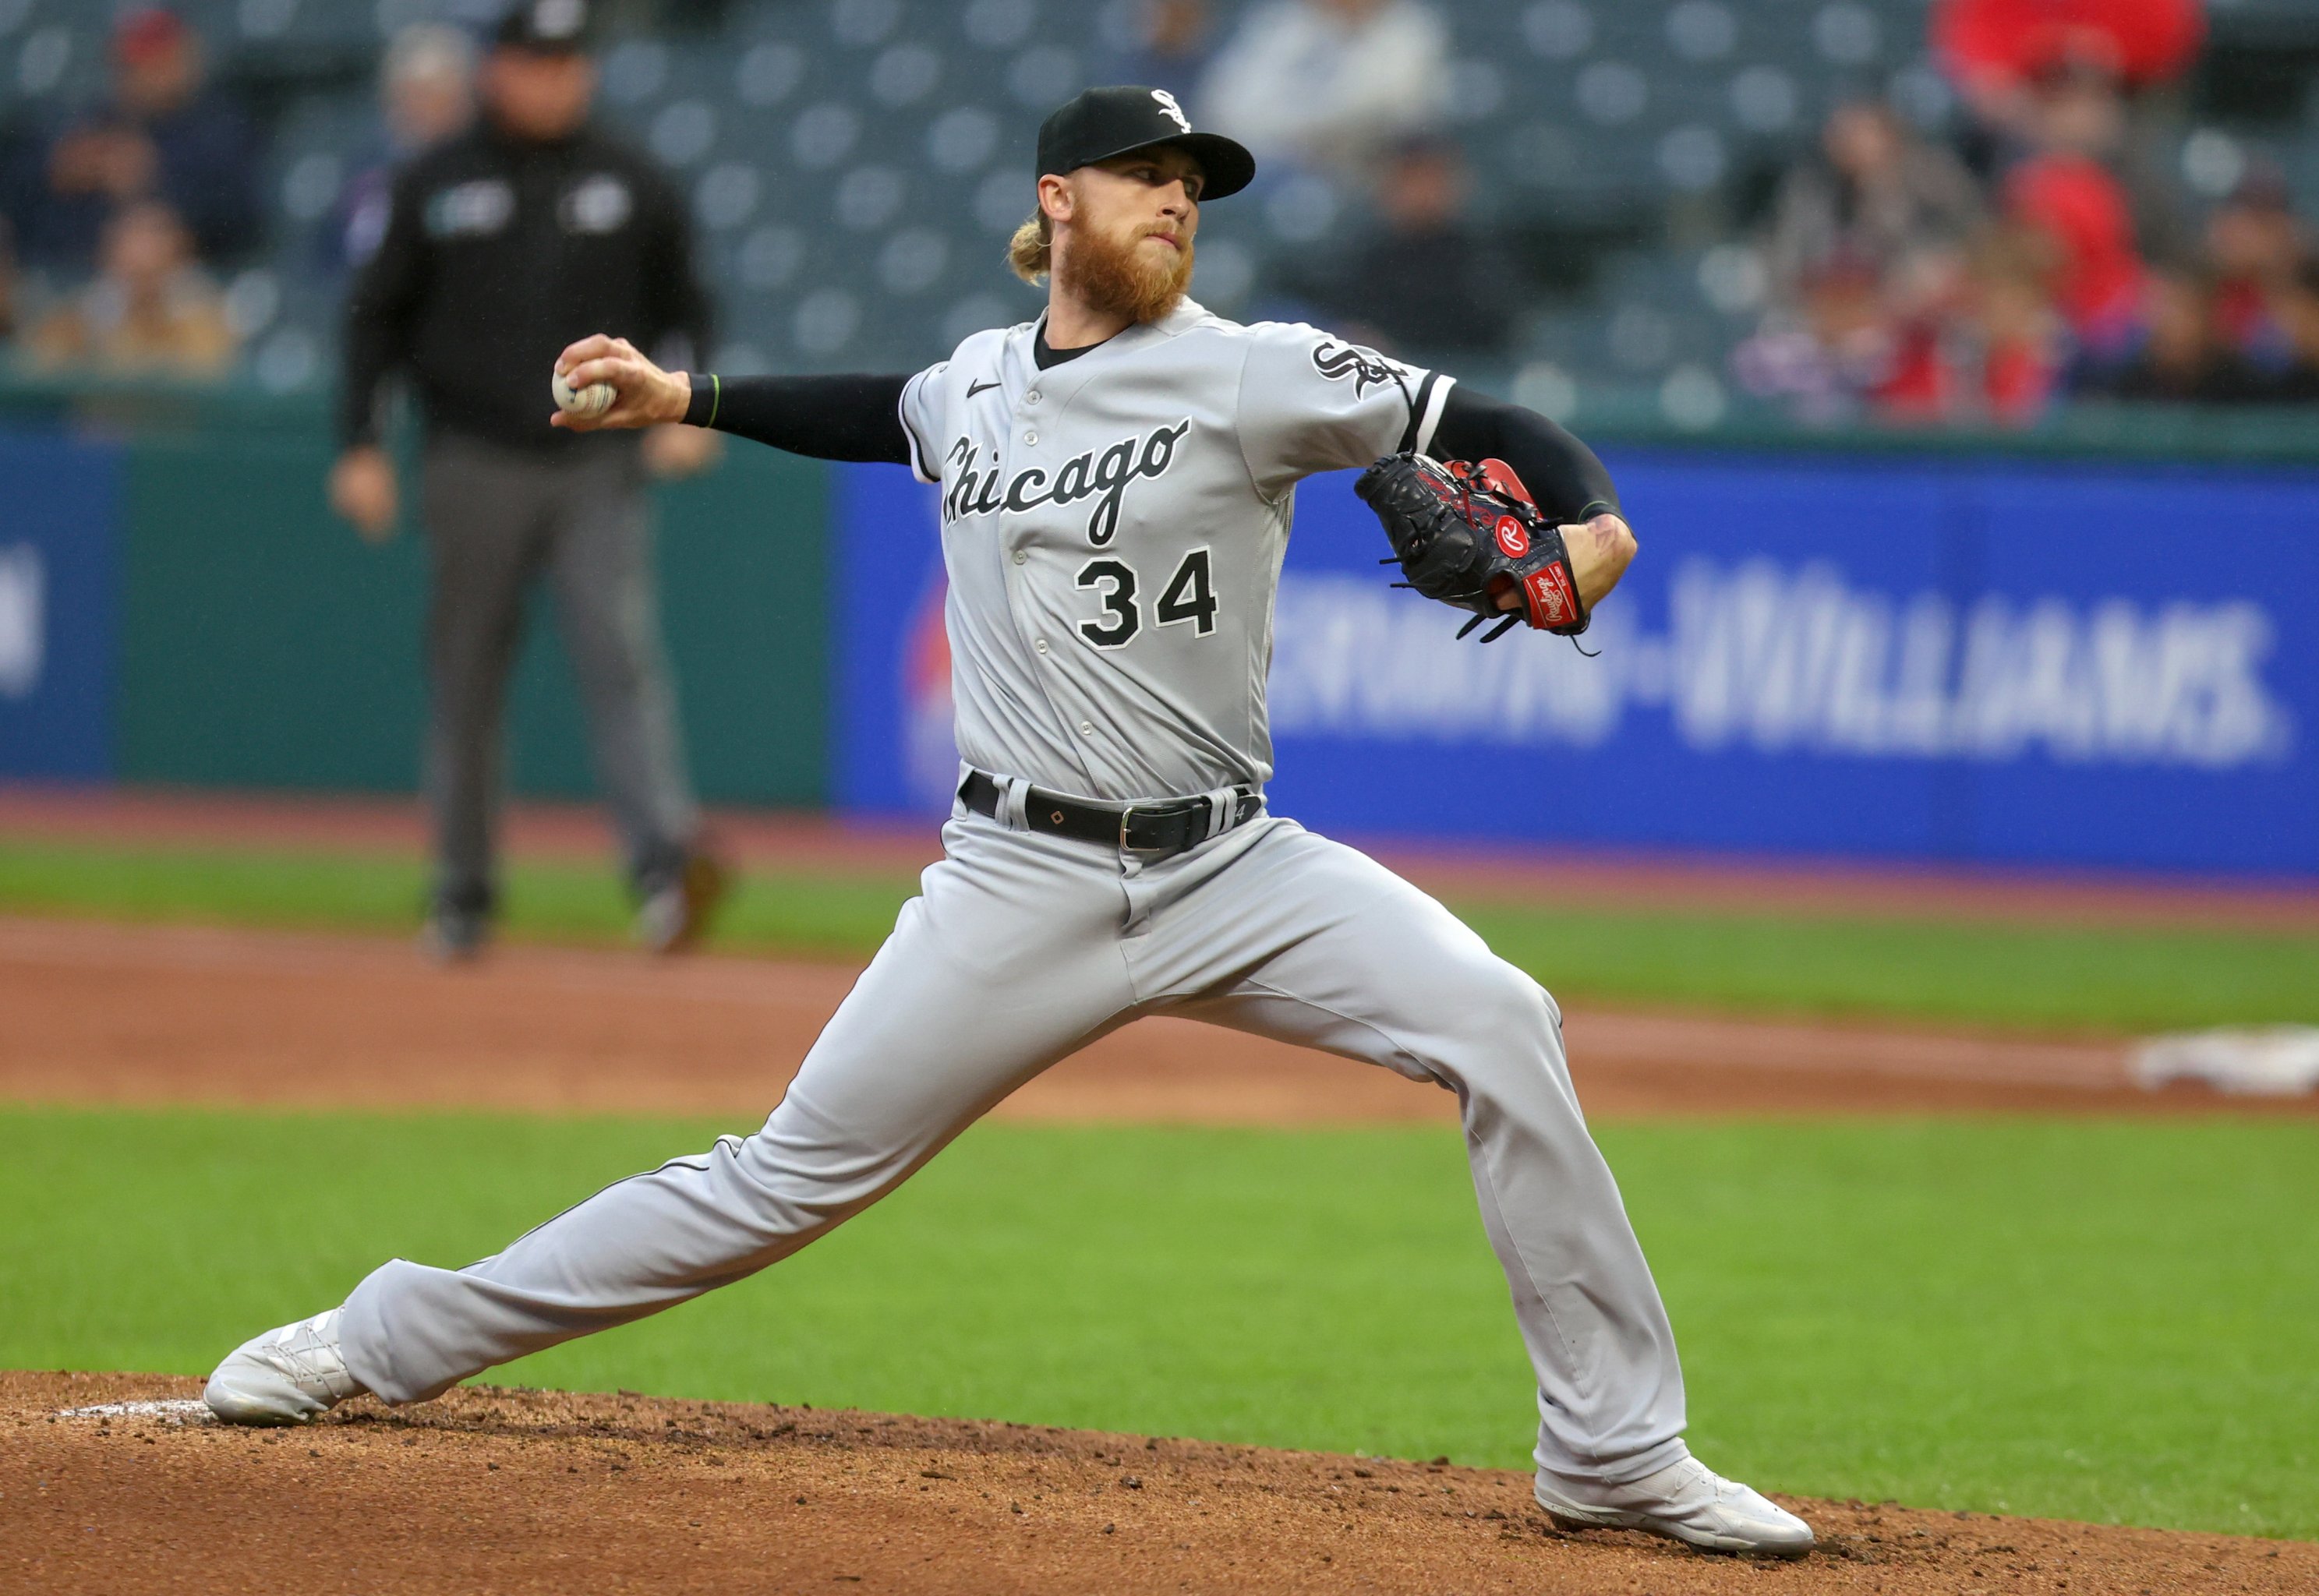 White Sox' Dylan Cease, Brewers' Freddy Peralta, Guardians' Zach Plesac  Throw MLB's Best Sliders